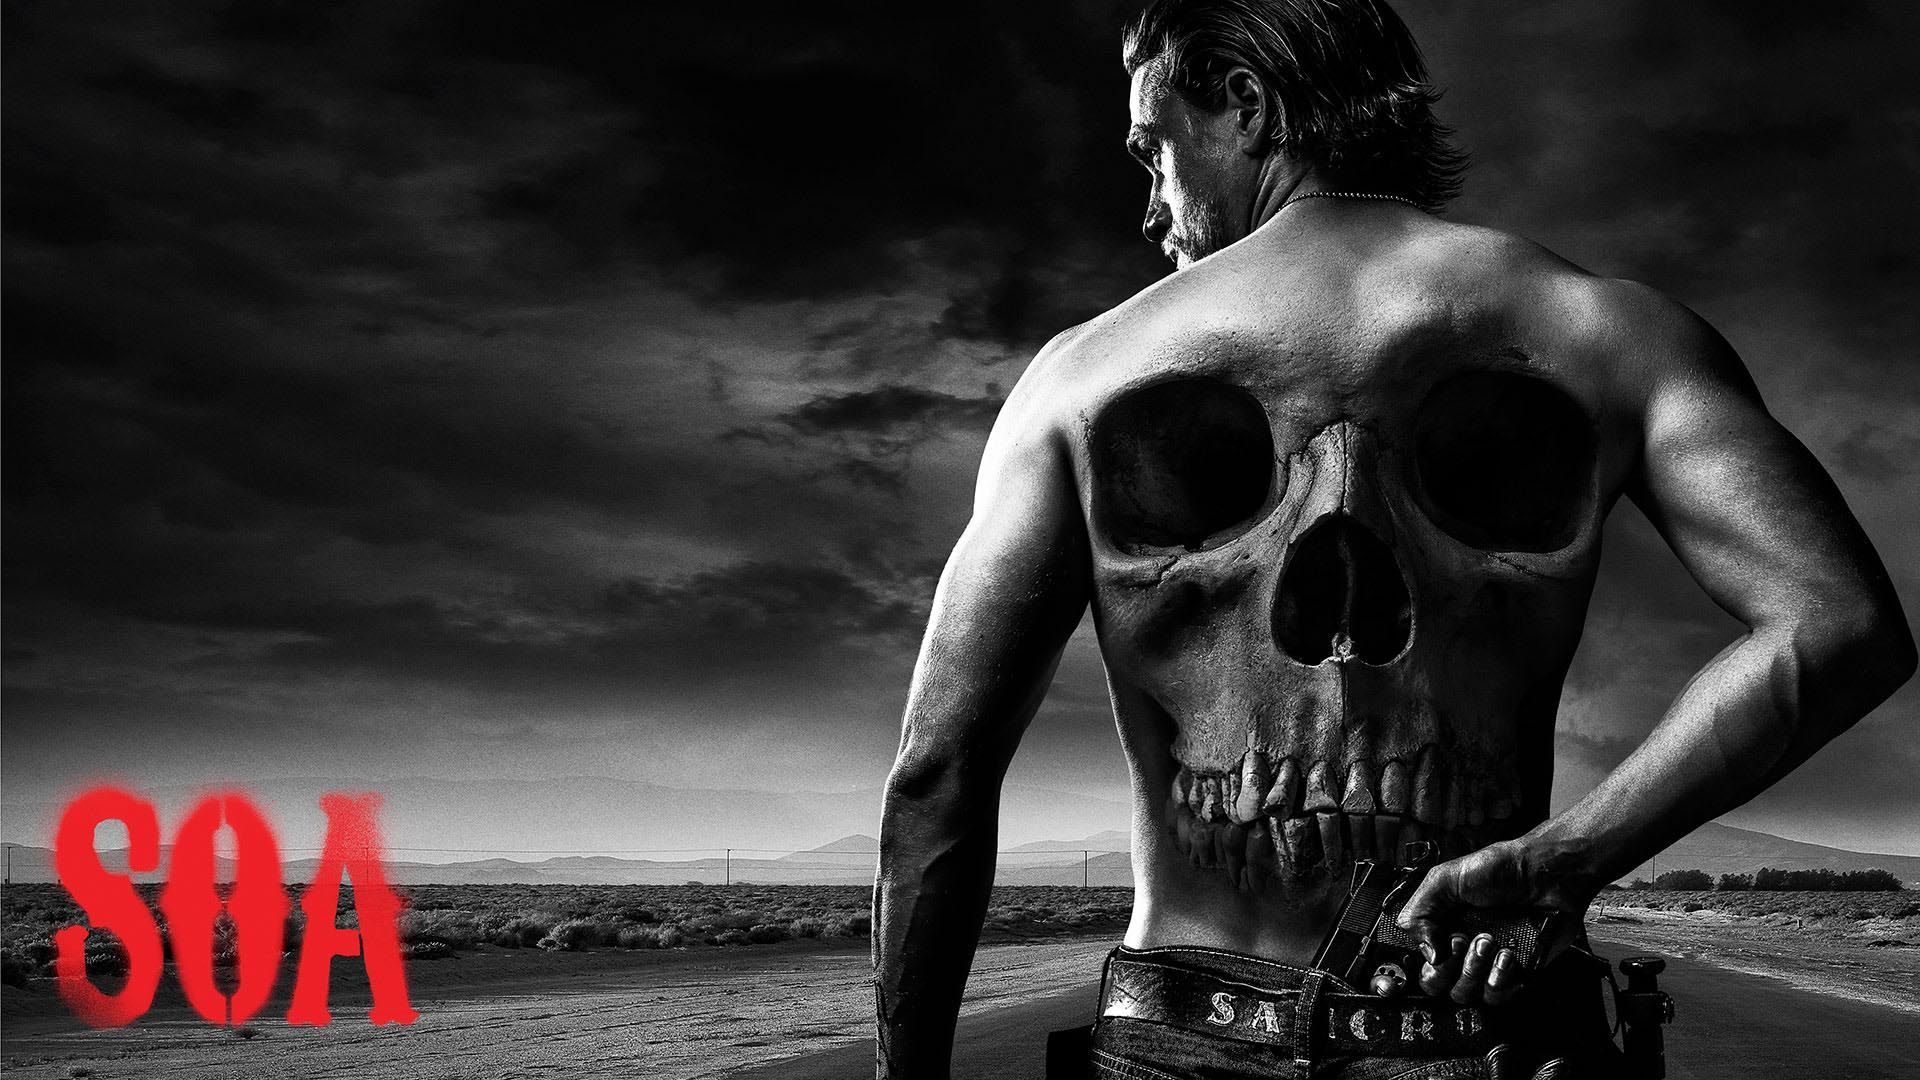 Sons Of Anarchy - Sons Of Anarchy Wallpaper (37627568) - Fanpop